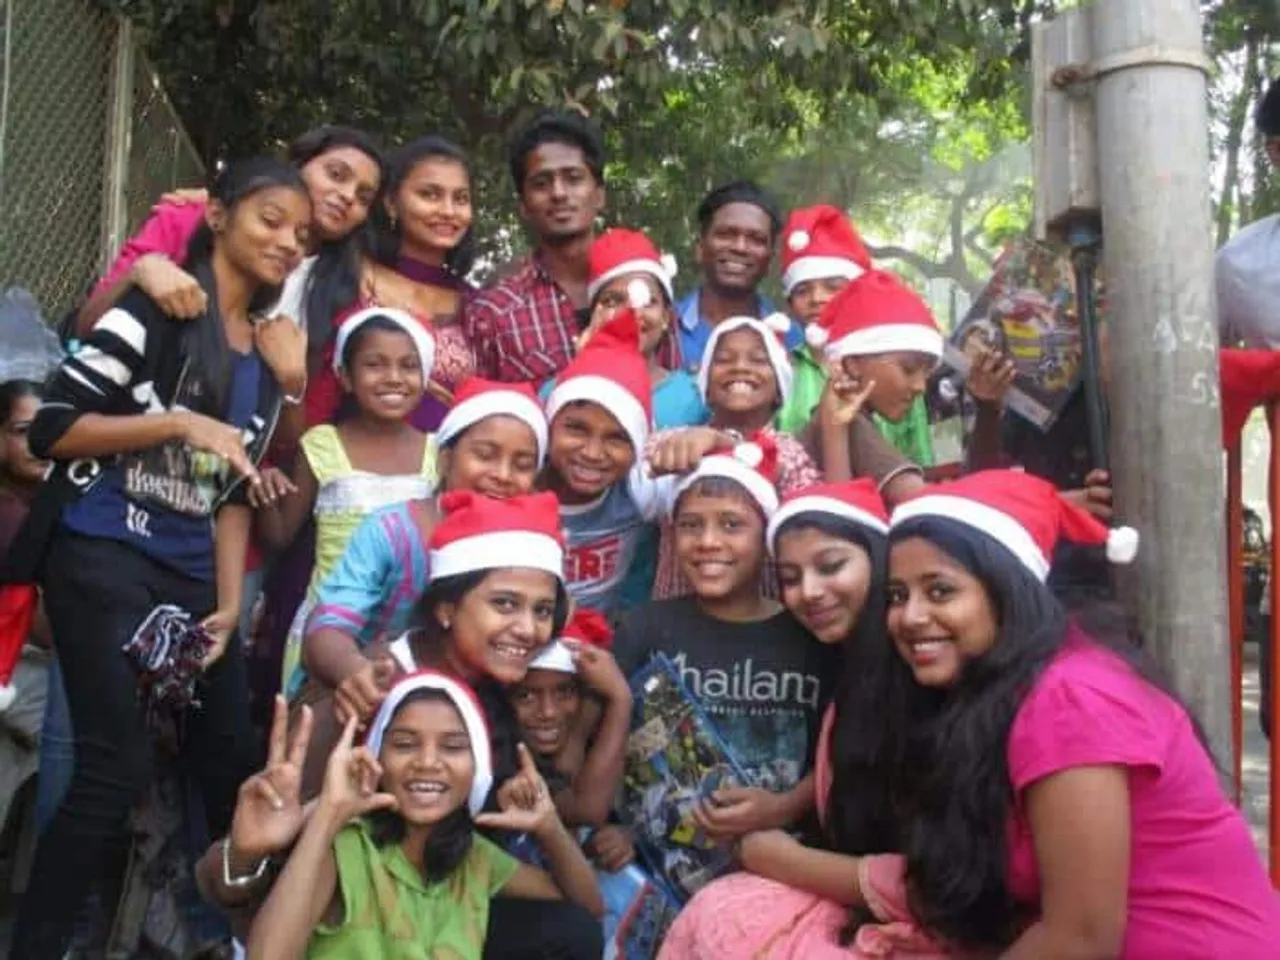 Snapdeal, Uber, and UrbanClap partner with NGOs to celebrate Christmas and New Year with underprivileged kids